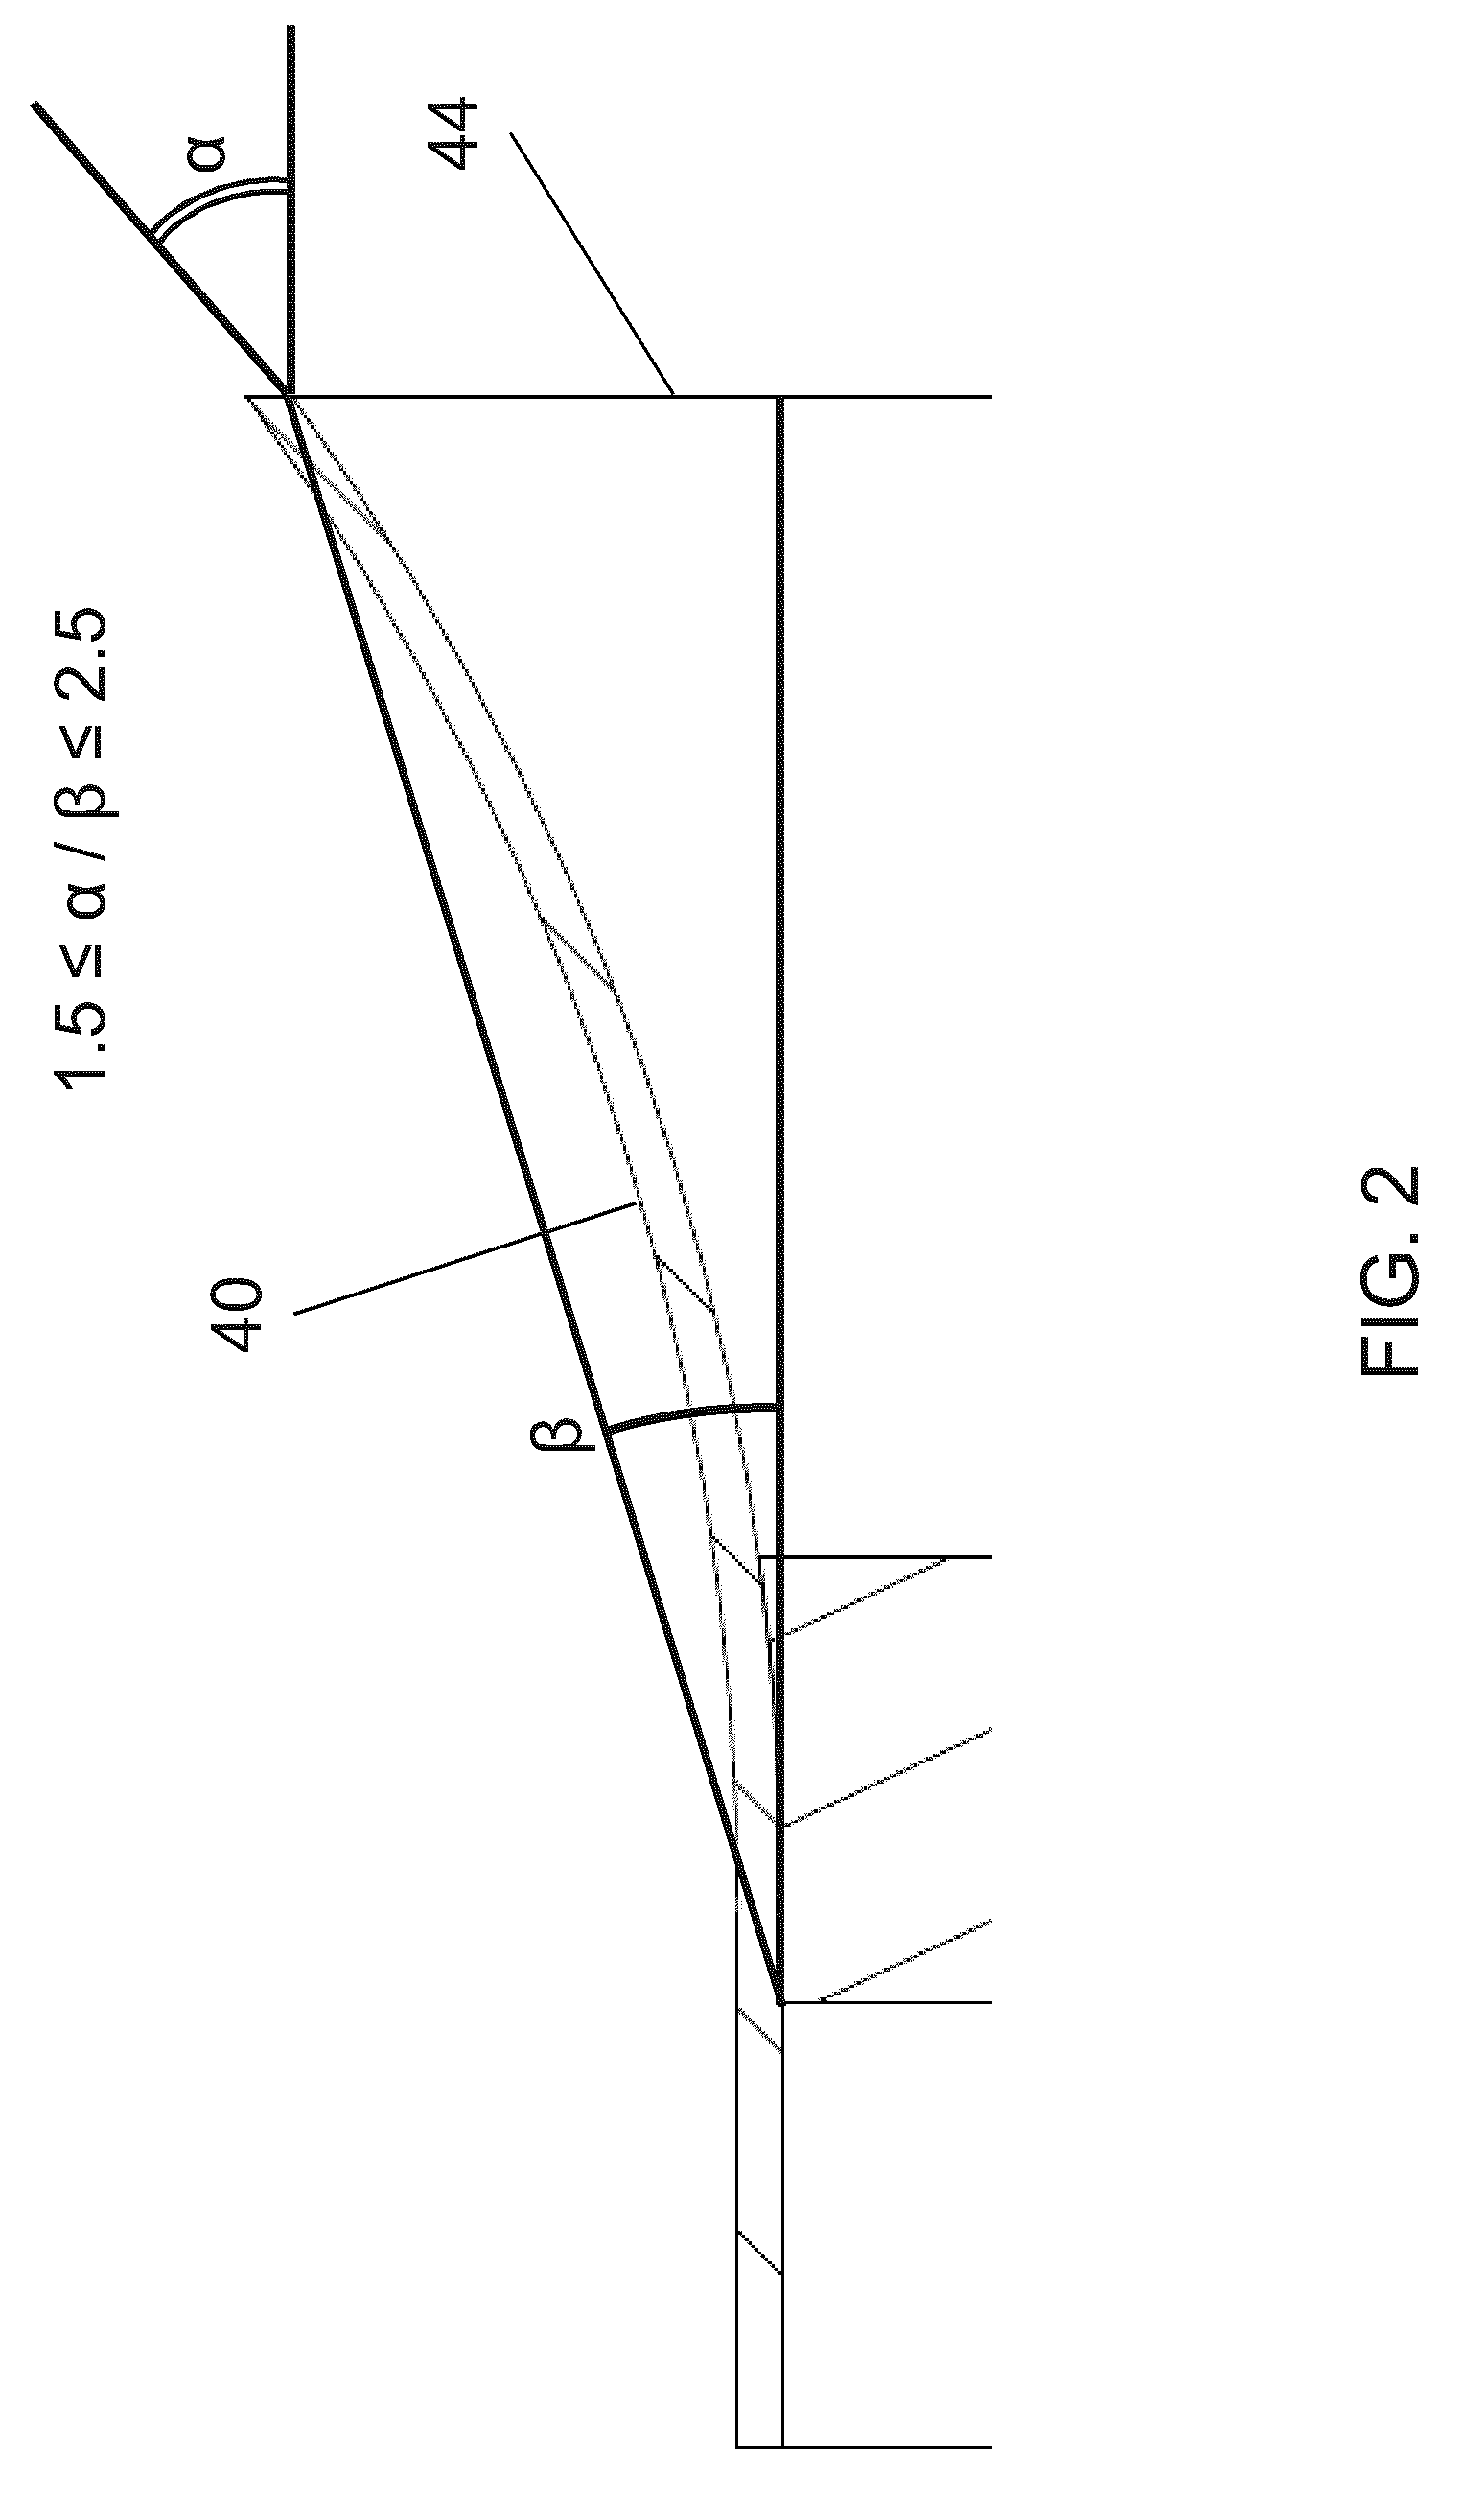 Unidirectional hydro turbine with enhanced duct, blades and generator